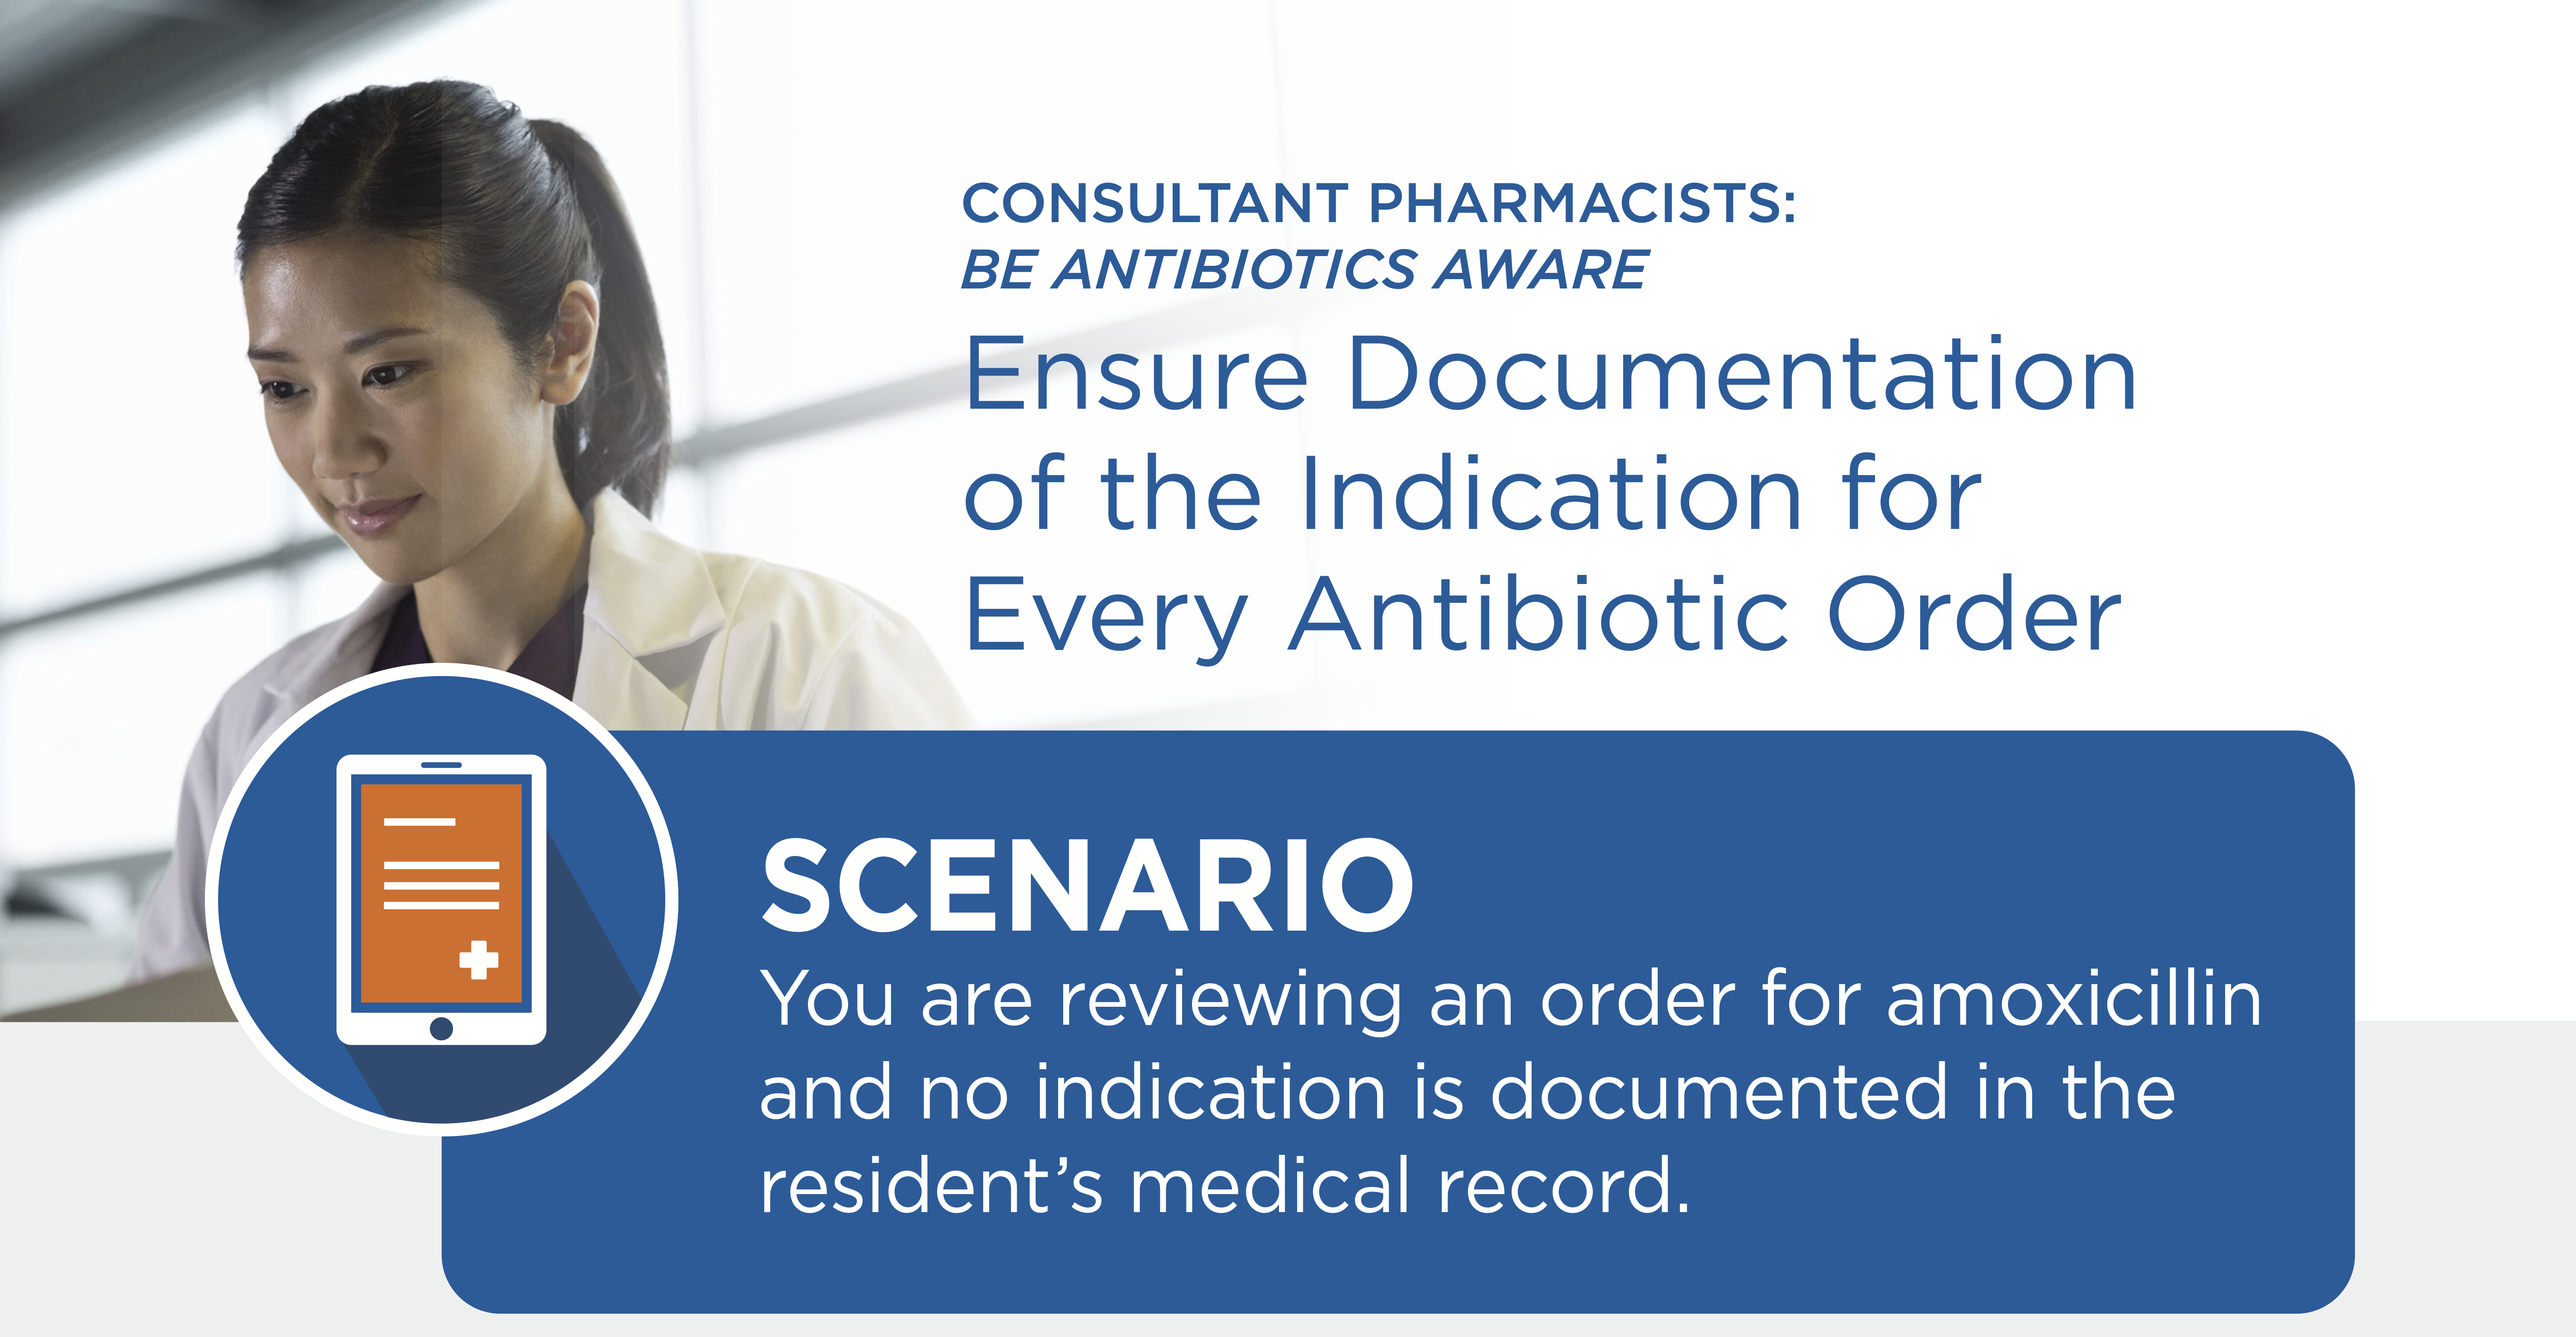 Ensure Documentation of the Indication for Every Antibiotic Order-Poster